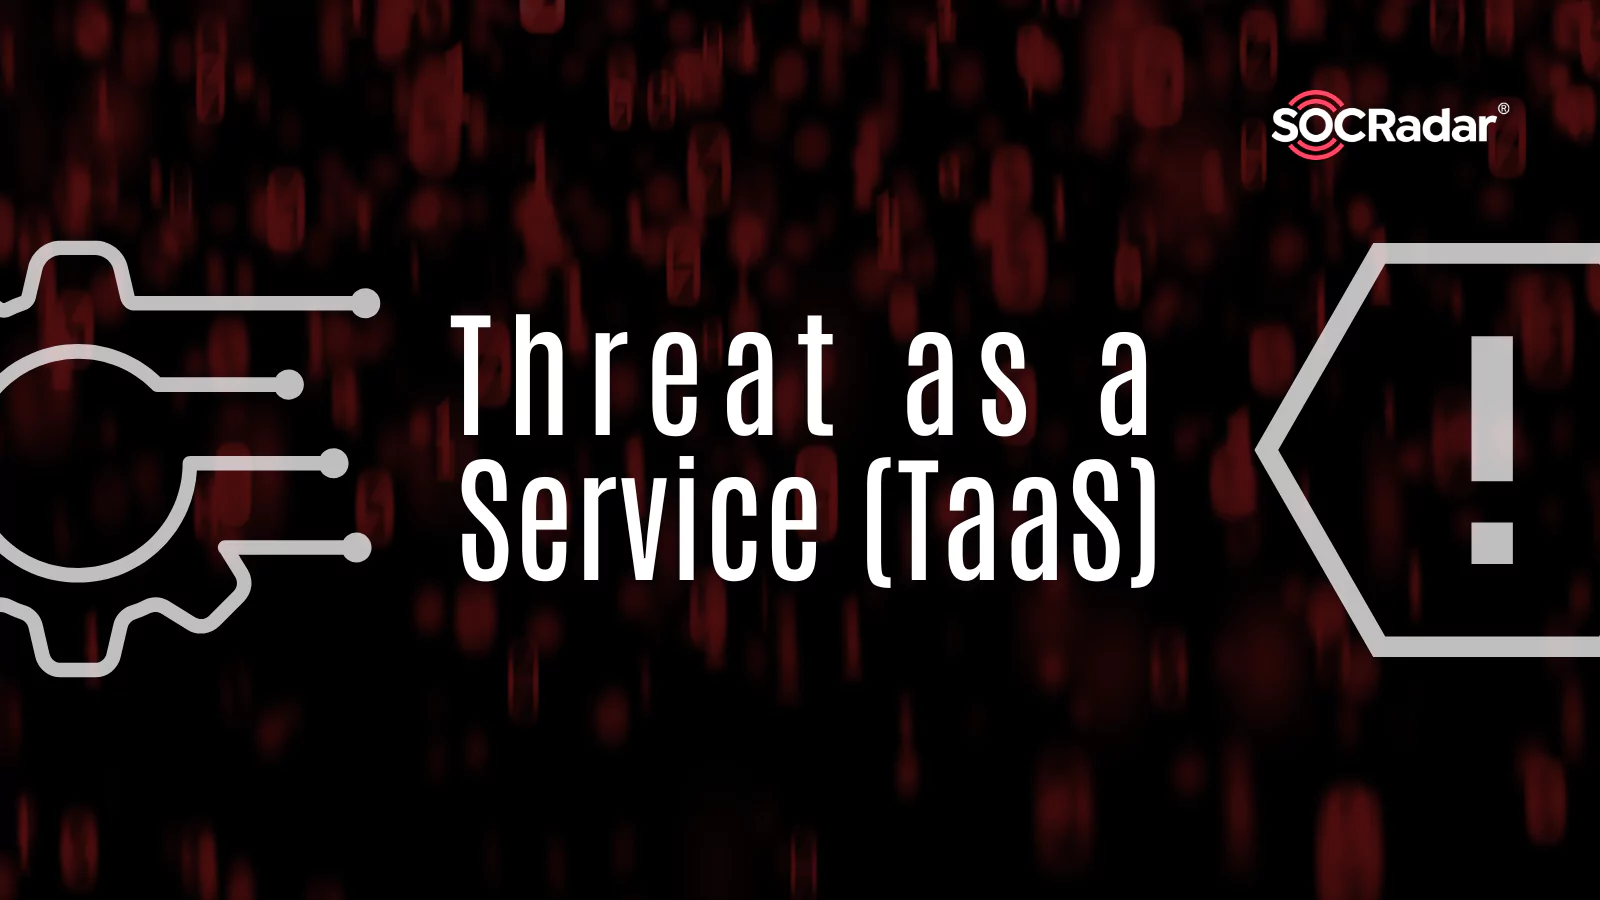 SOCRadar® Cyber Intelligence Inc. | Mother of the Threats: Threat as a Service